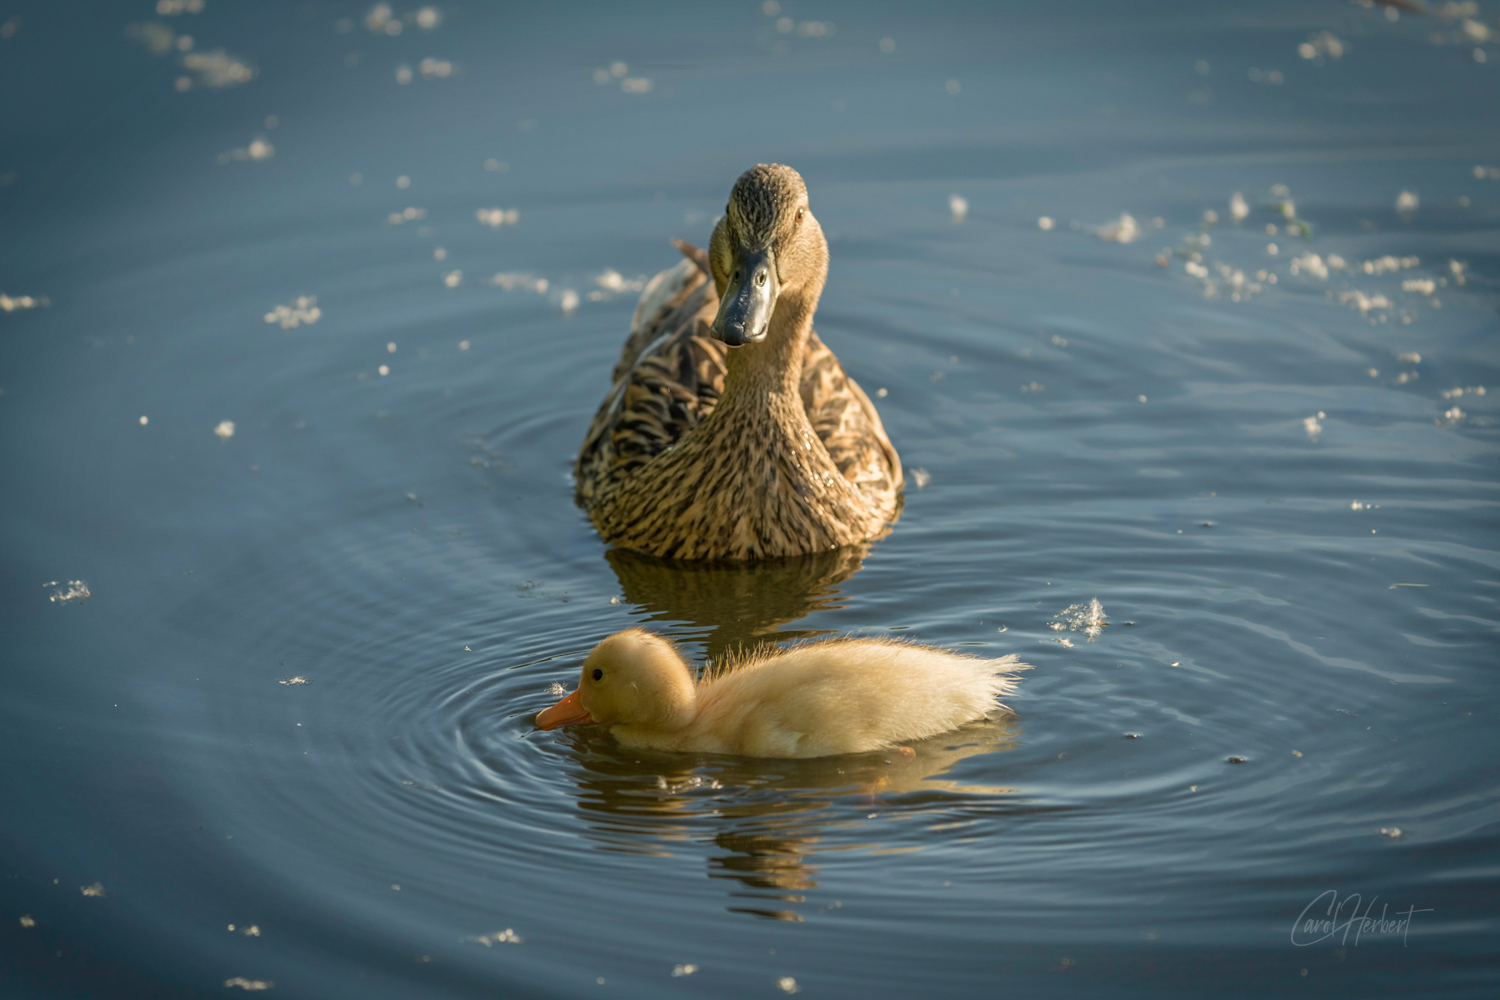 Photograph of a mother duck and her duckling